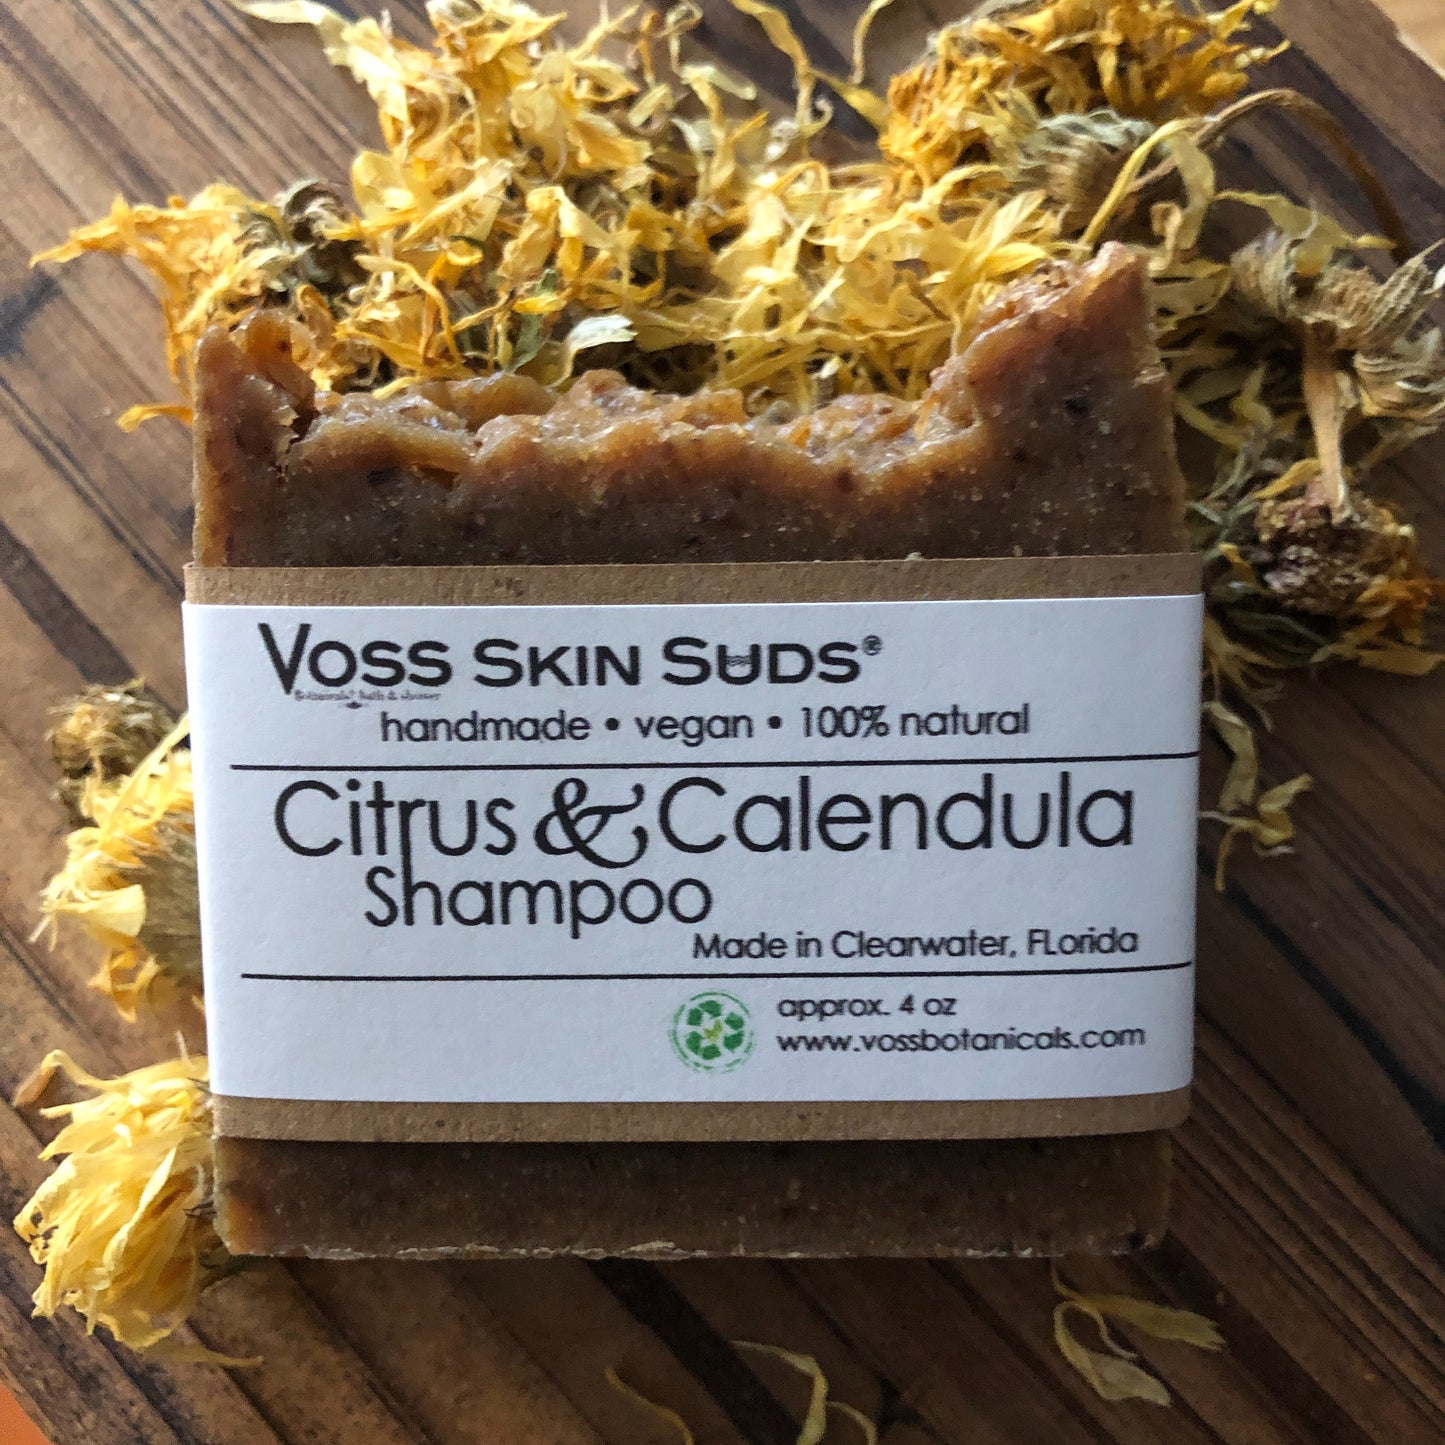 Shampoo Bar Citrus and Calendula PRODUCT FOOTPRINTS Natural ingredients Phthalate, Sulfate, Petroleum & Paraben Free Vegan Free of Synthetic Fragrances Free of Synthetic Dyes GMO & Gluten-free Non Toxic Handmade Sustainable Innovation Made in the USA Cruelty Free Zero Waste Low Carbon Footprint eco friendly   Holiday care package gift box gift for her relaxation gift self care box self care gift box spa gift box spa gift set thank you gift box birthday gift new mom gift relaxing bath set